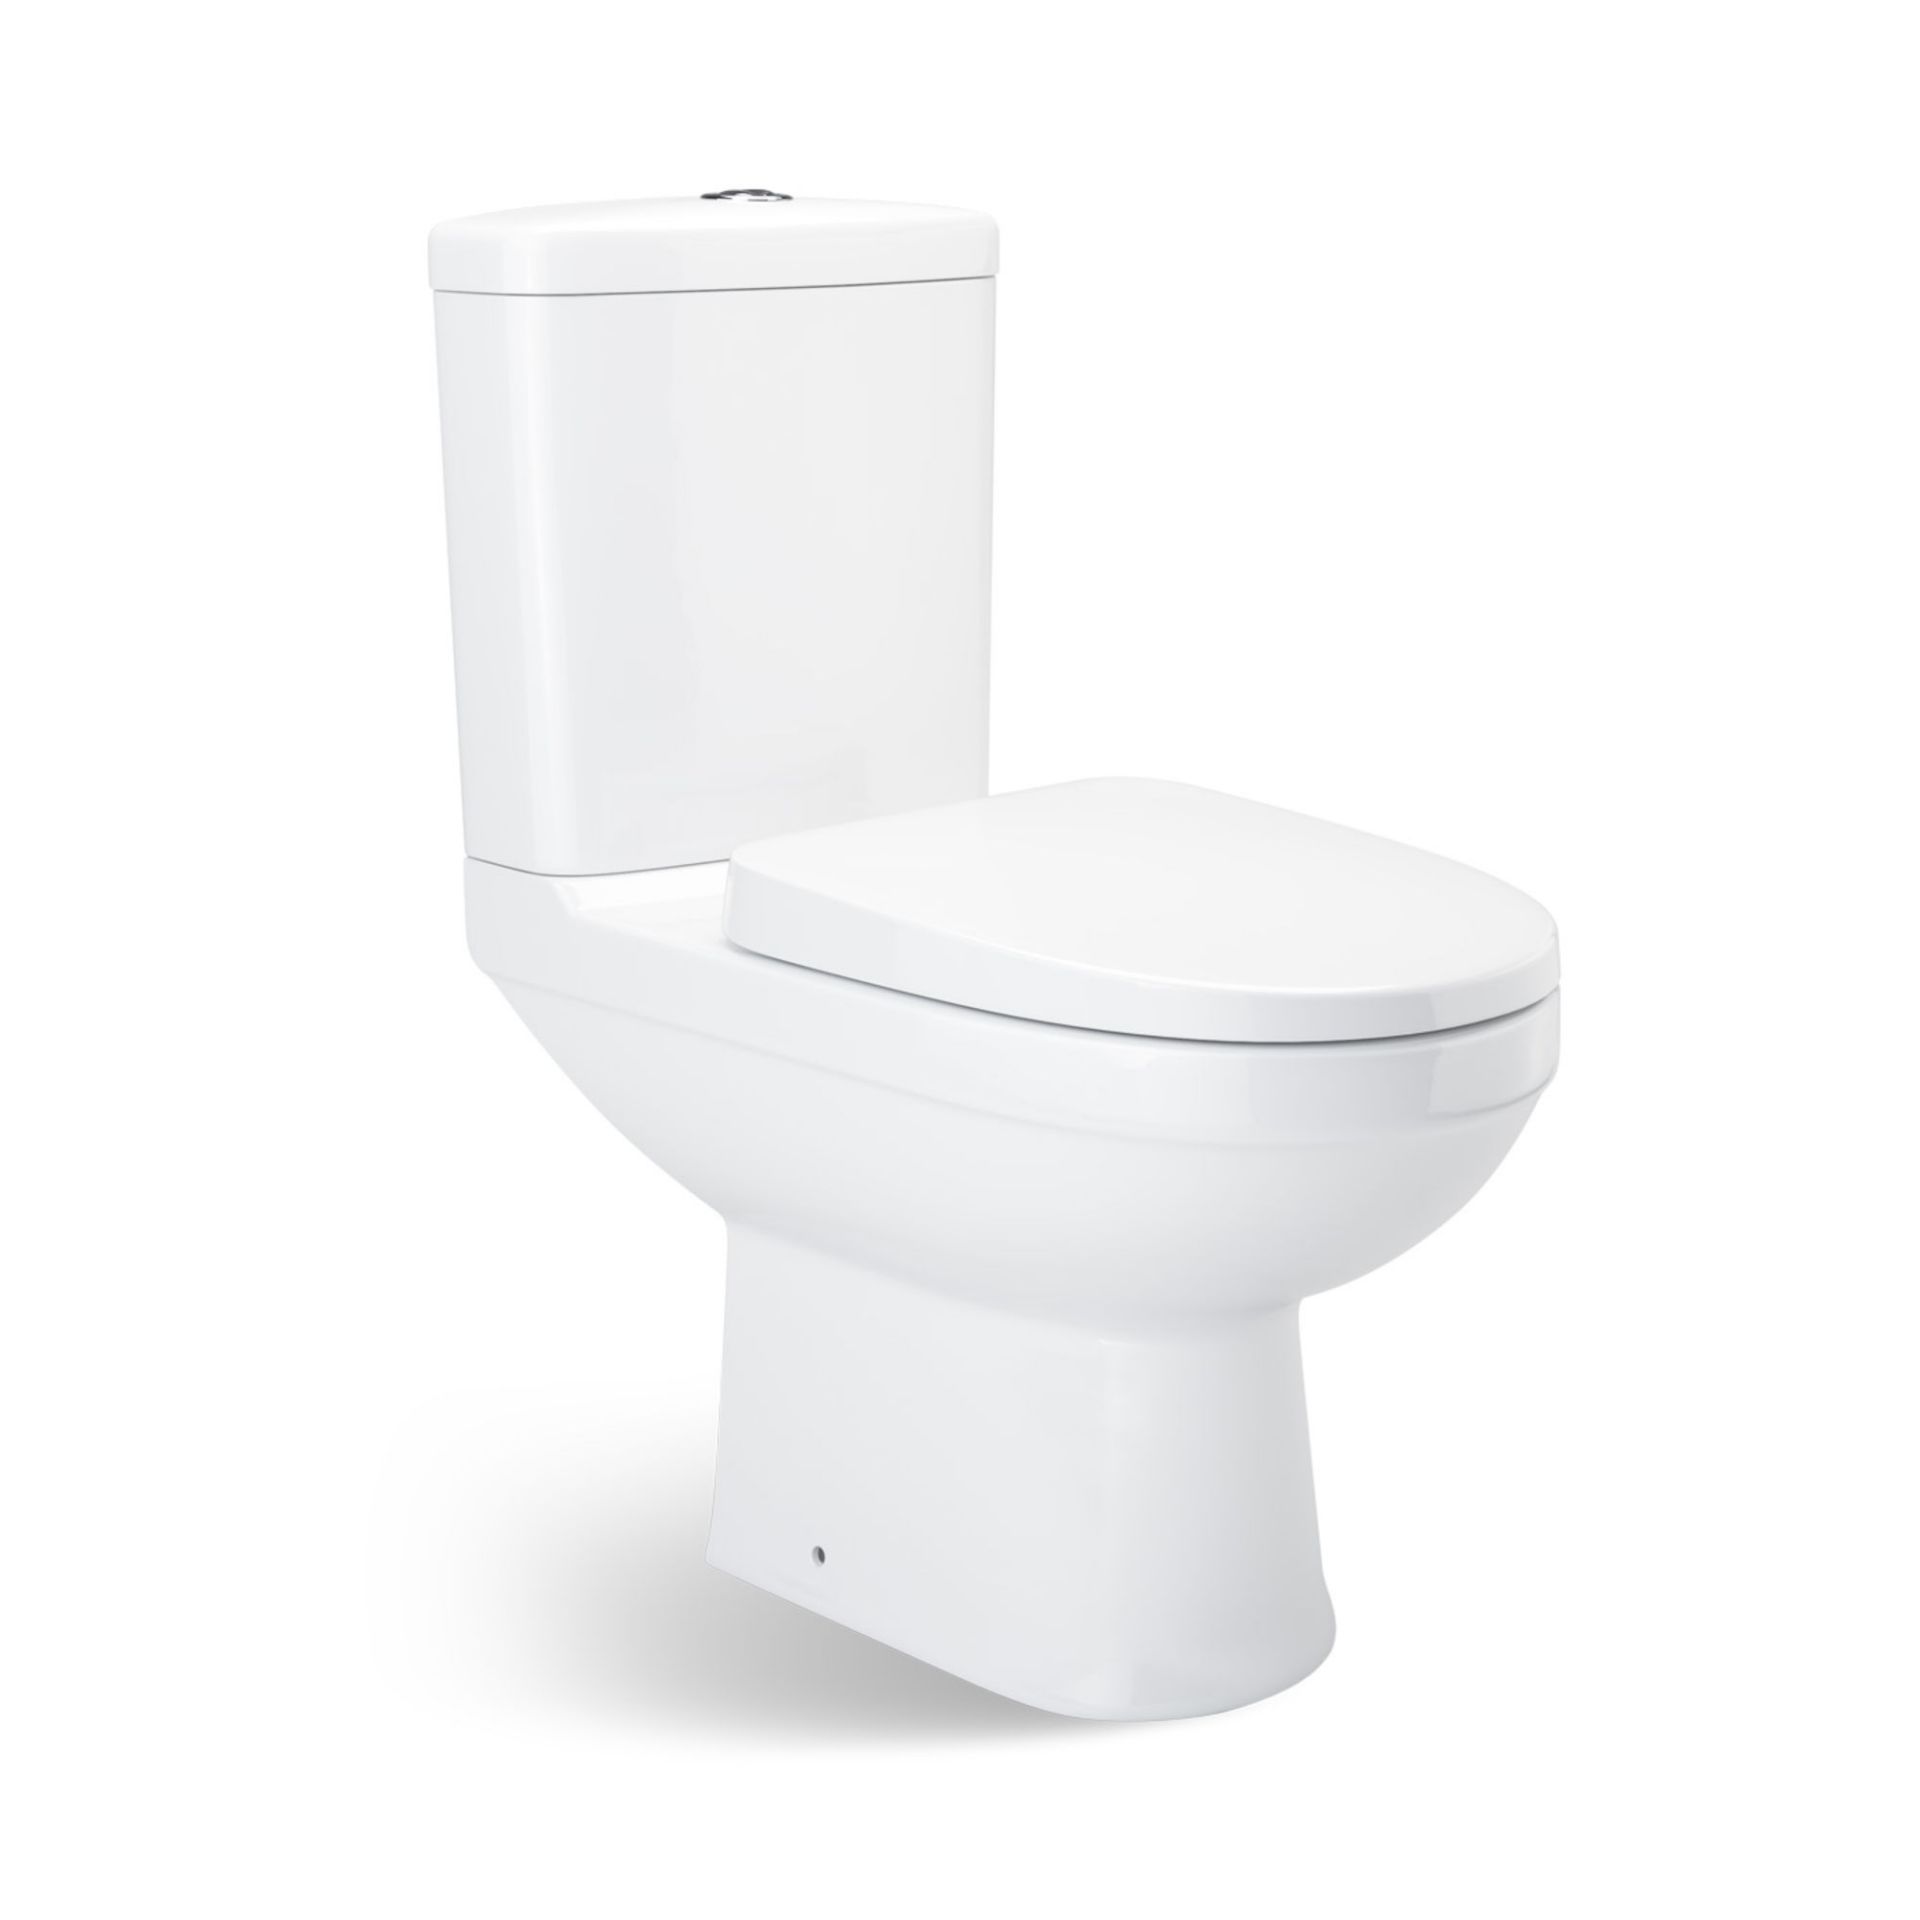 (OS26) Sabrosa II Close Coupled Toilet & Cistern inc Soft Close Seat. Made from White Vitreous China - Image 2 of 4